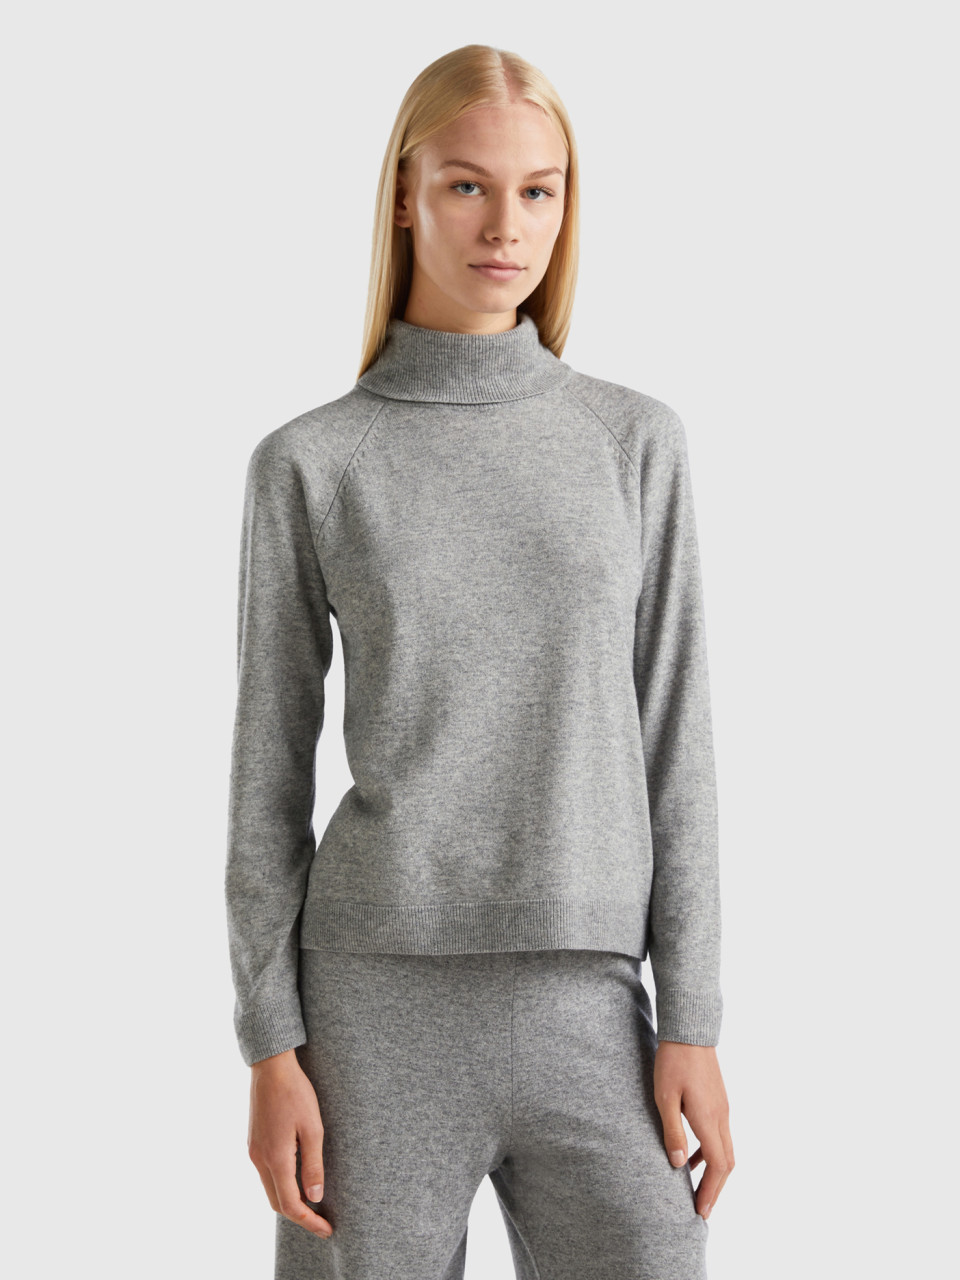 Benetton, Gray Turtleneck Sweater In Cashmere And Wool Blend, Light Gray, Women